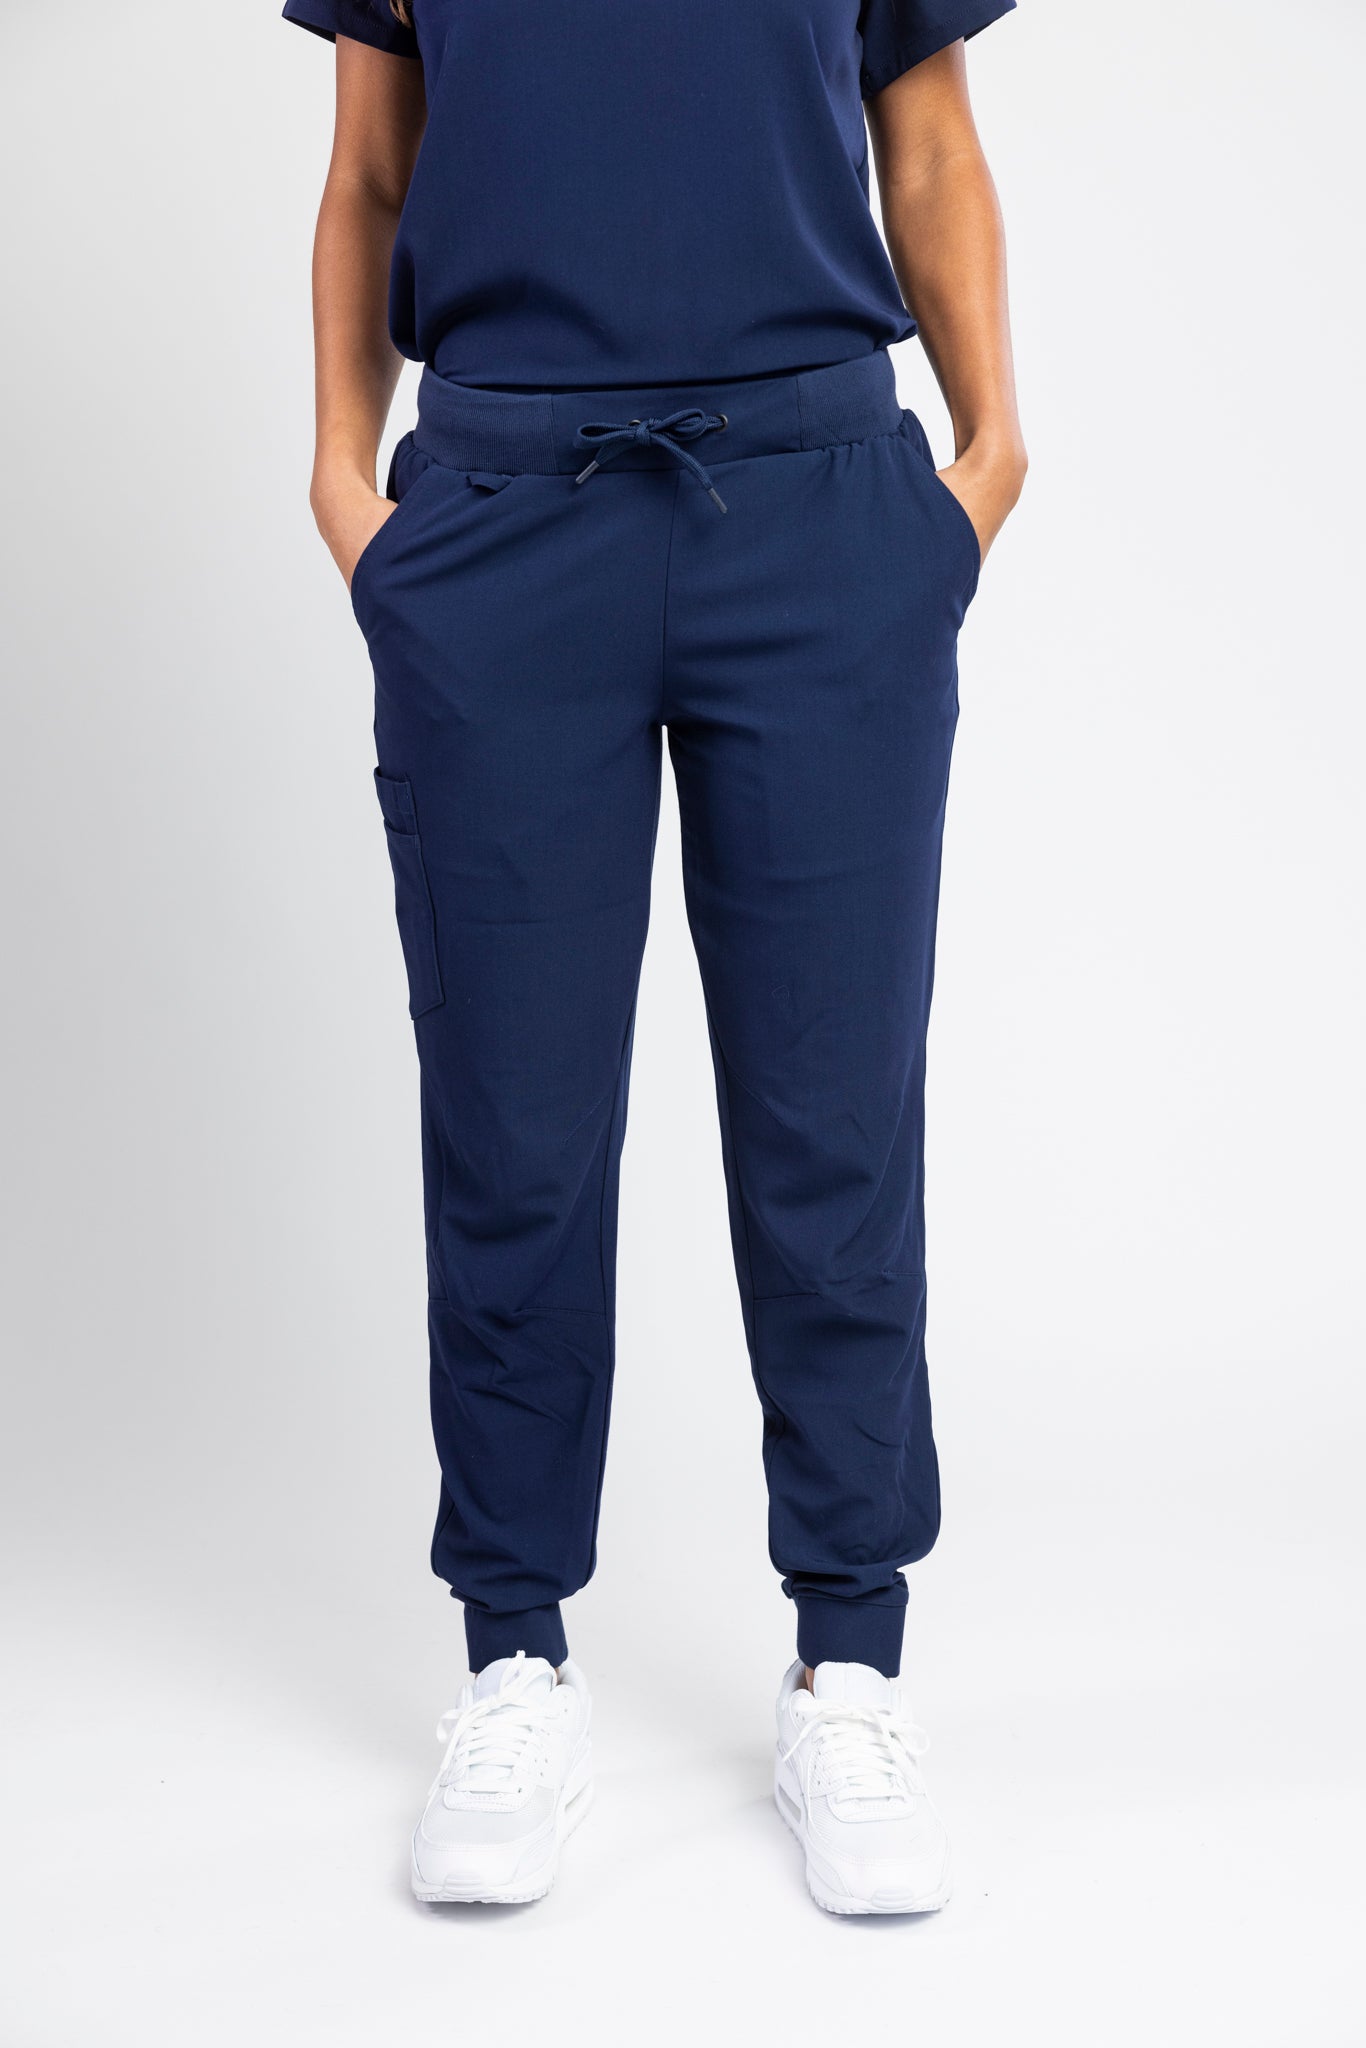 Apollo Scrubs - Hers - Essential Pant for women, antimicrobial, jogger